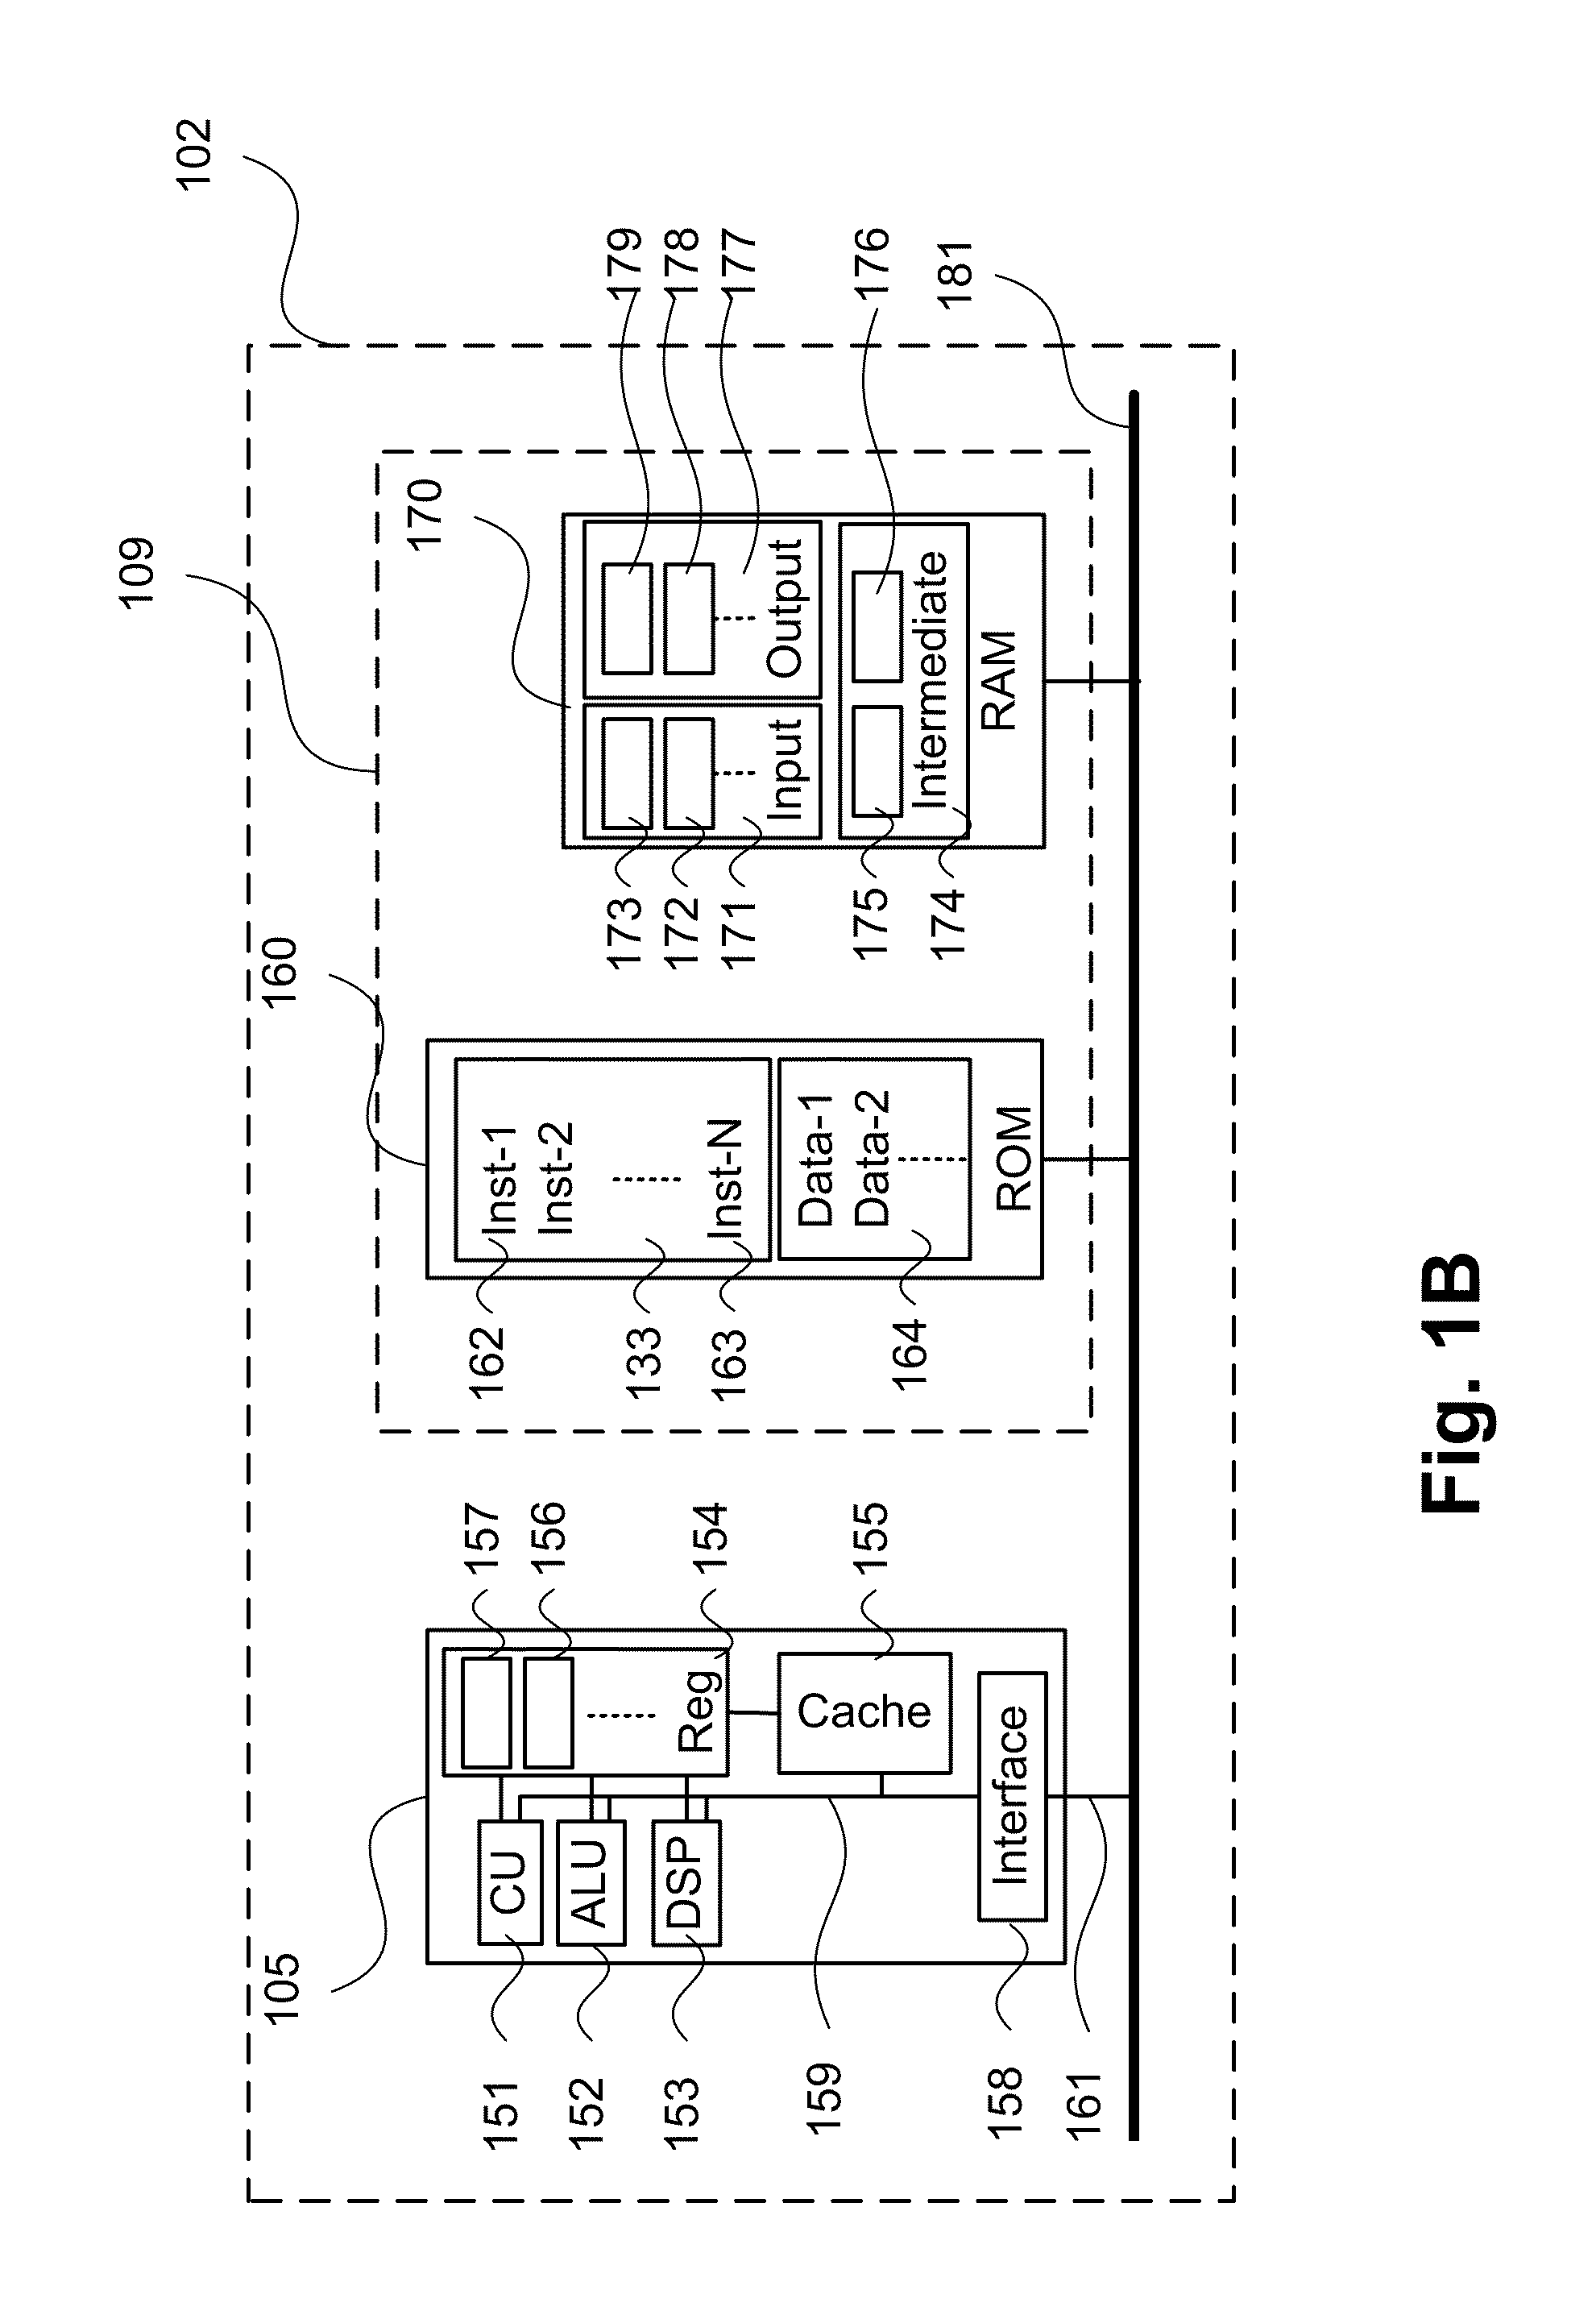 Method of compositing variable alpha fills supporting group opacity